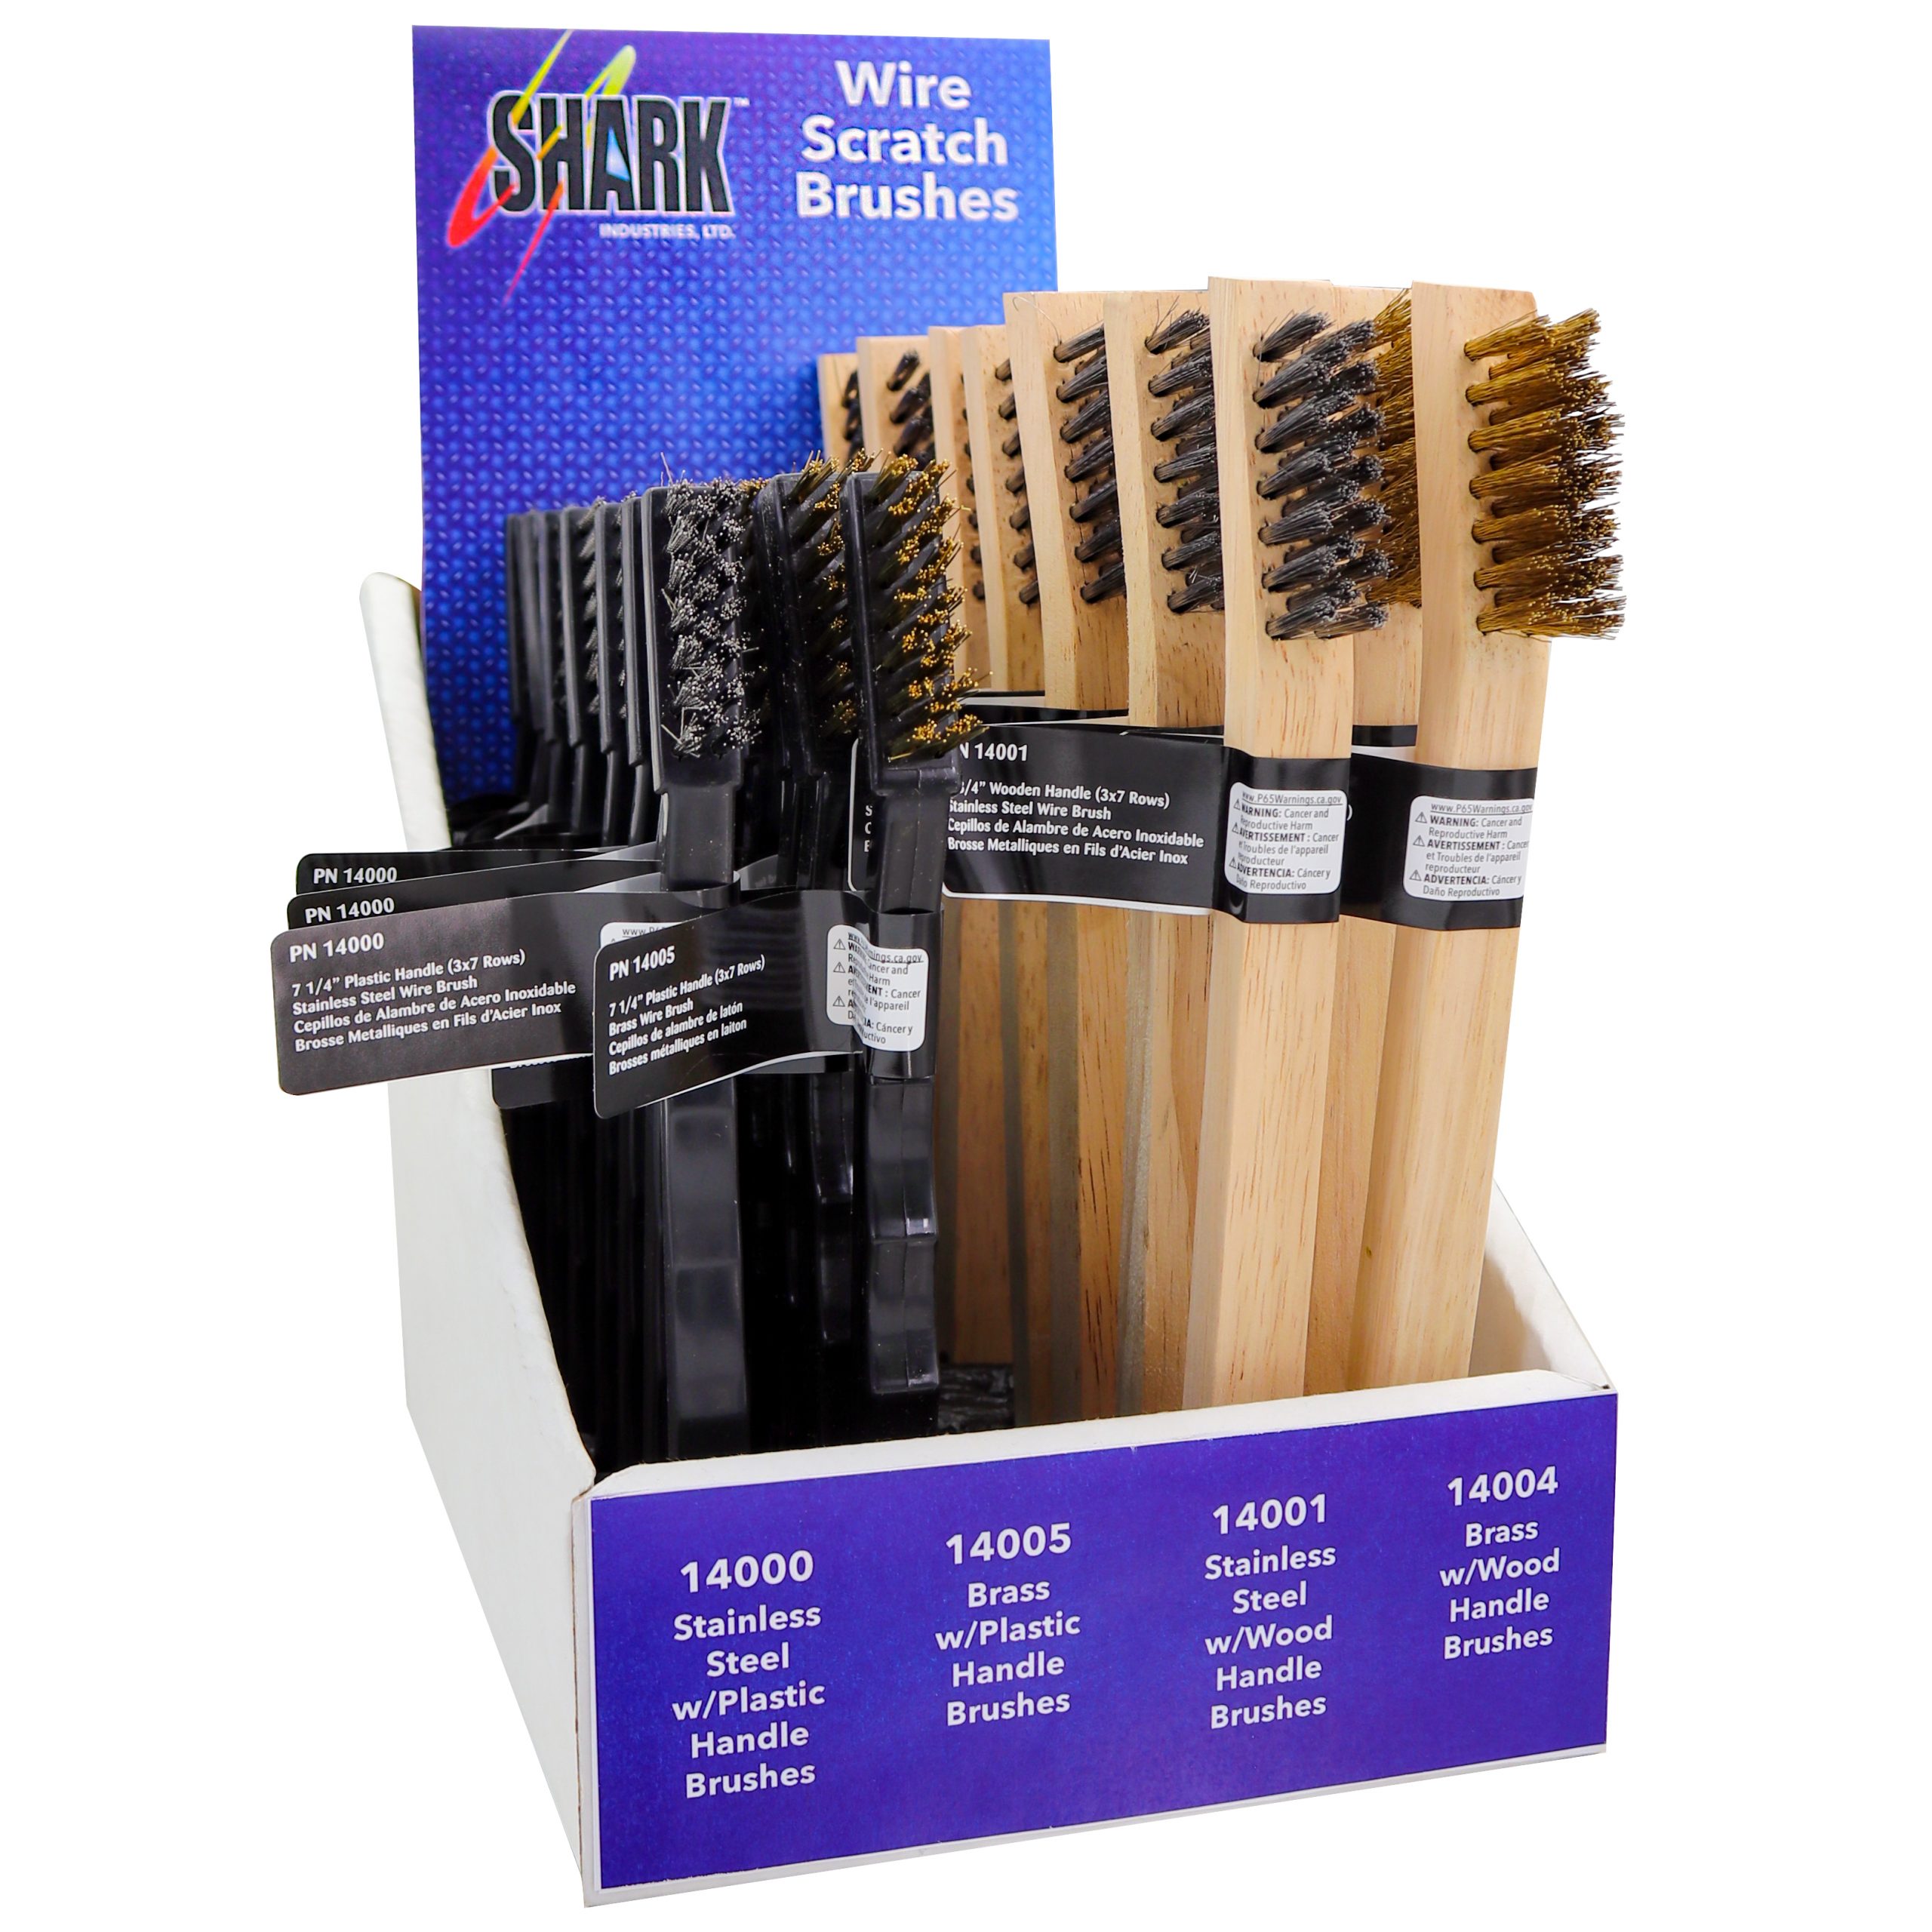 30 Piece Wire Scratch Brushes with Display Box - Shark Industries